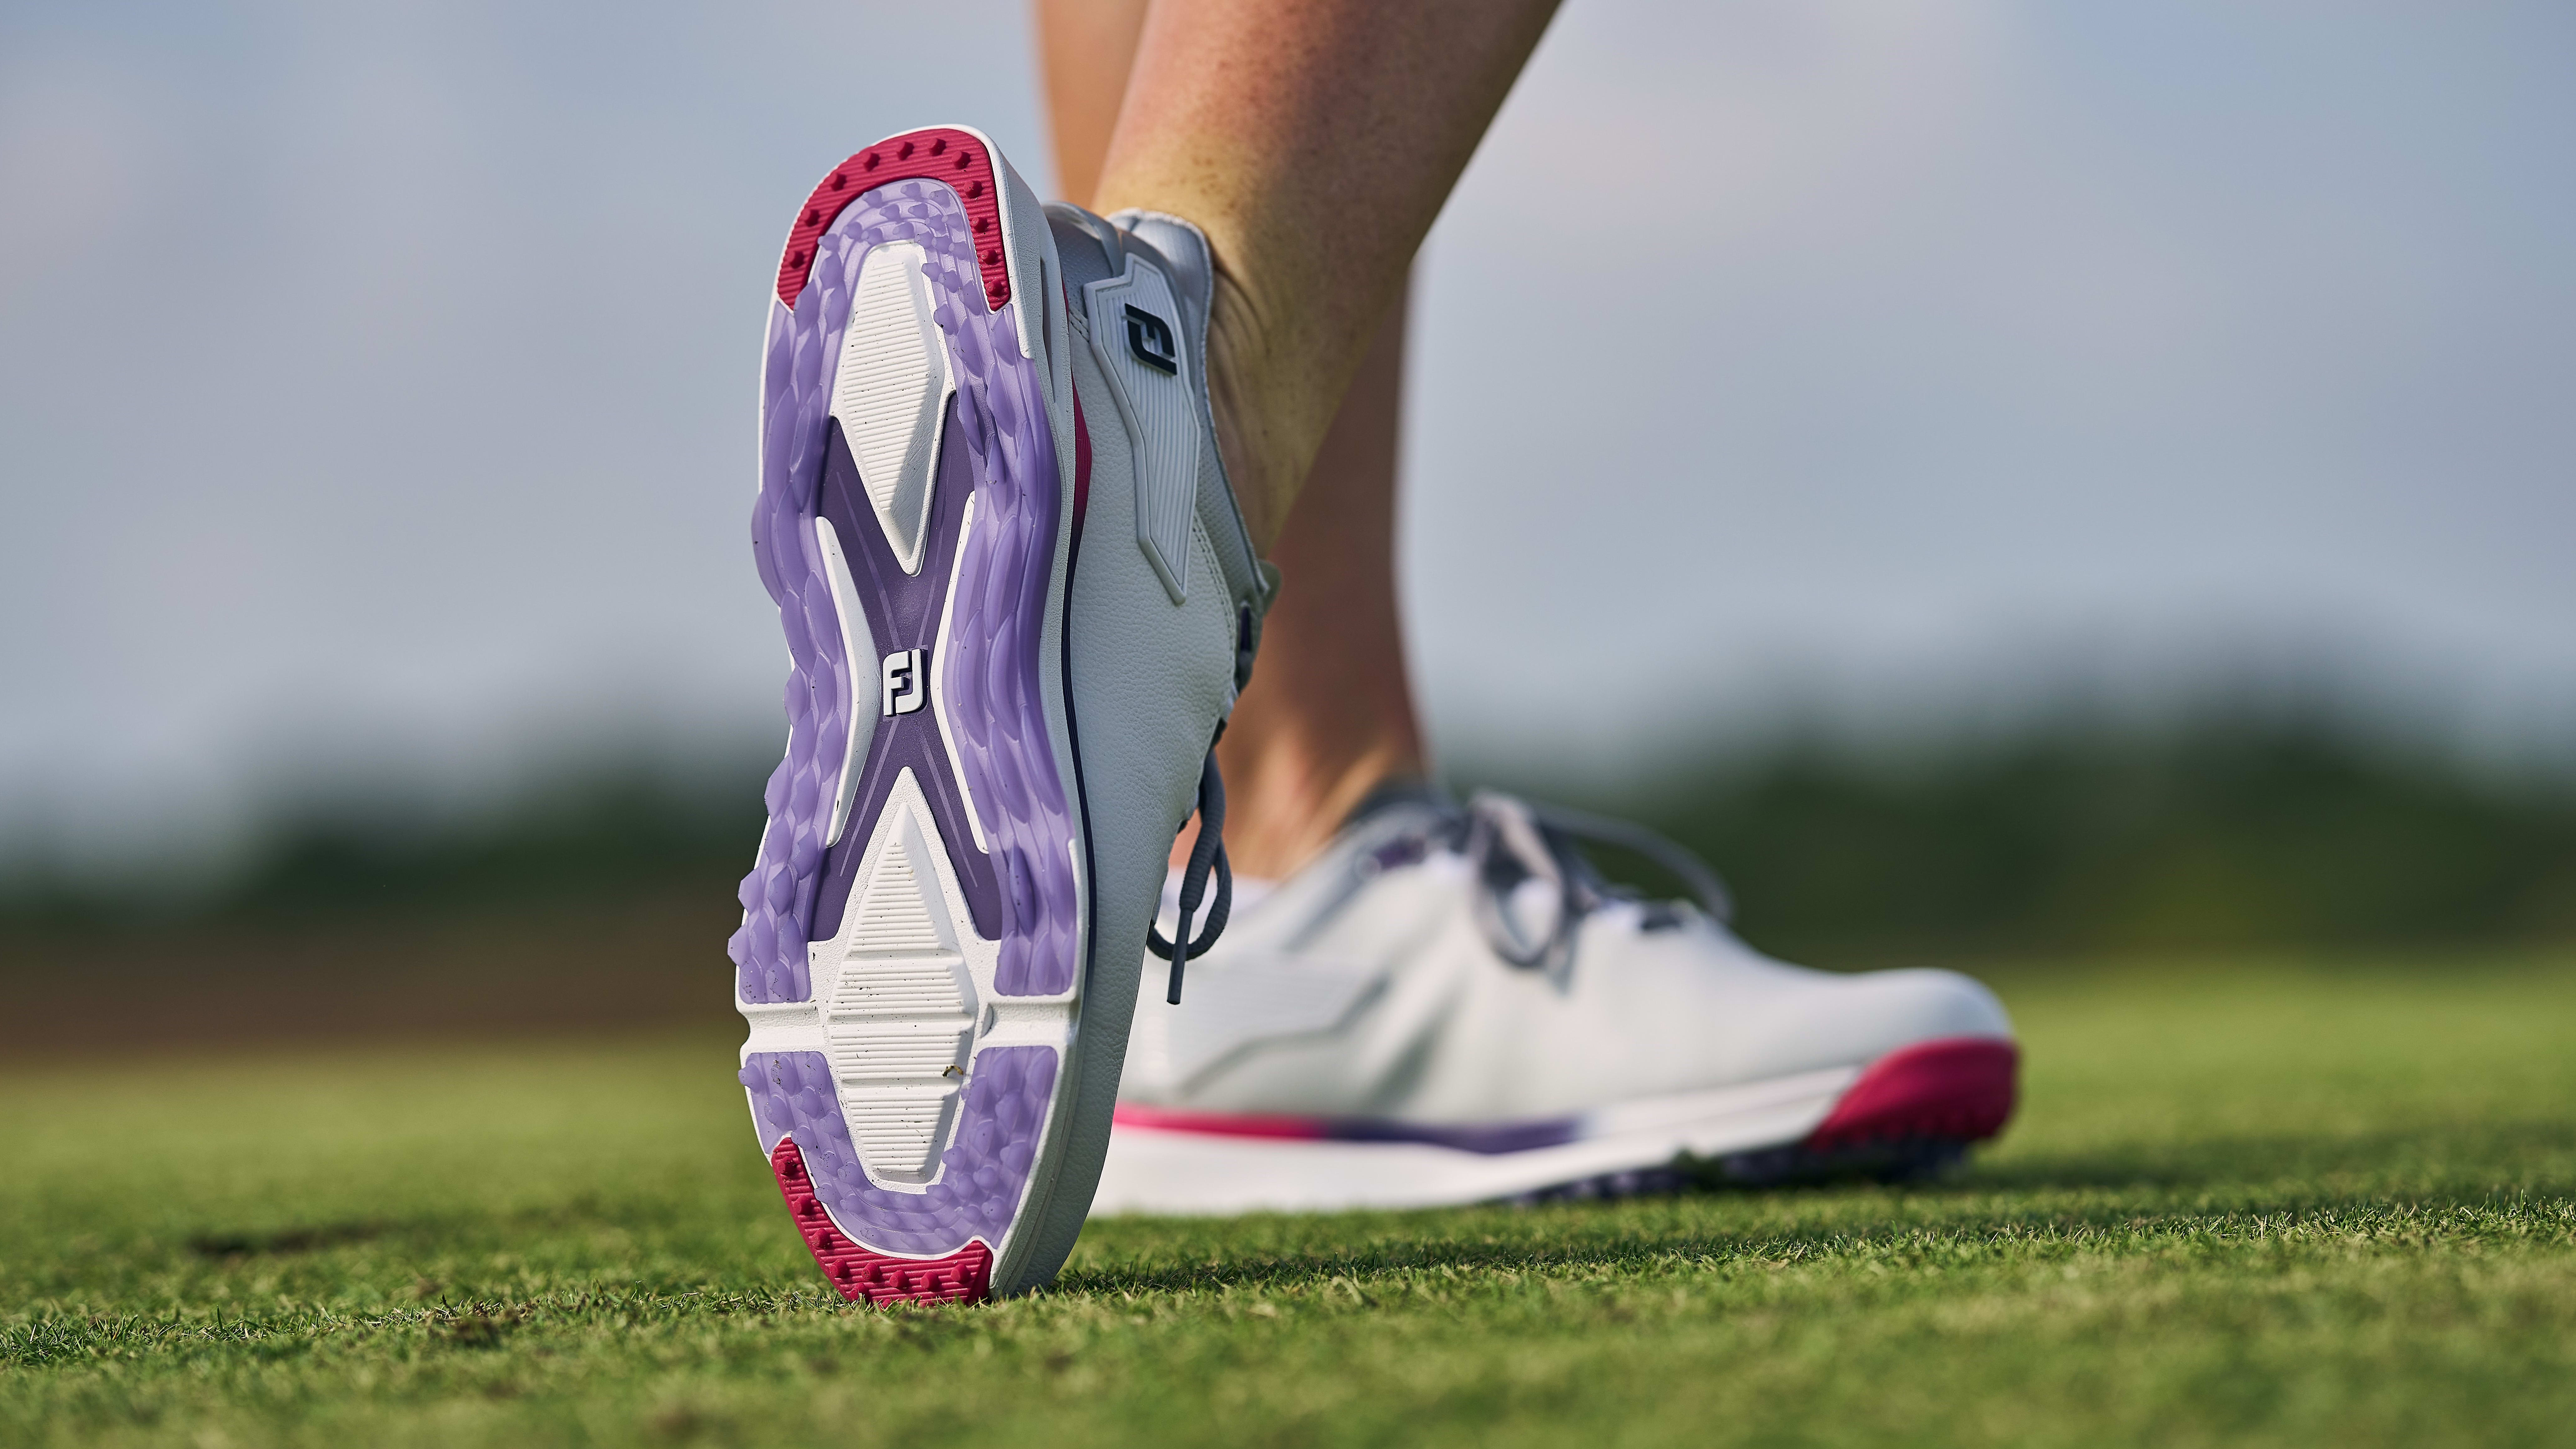 Side view of white and purple FootJoy golf shoes.